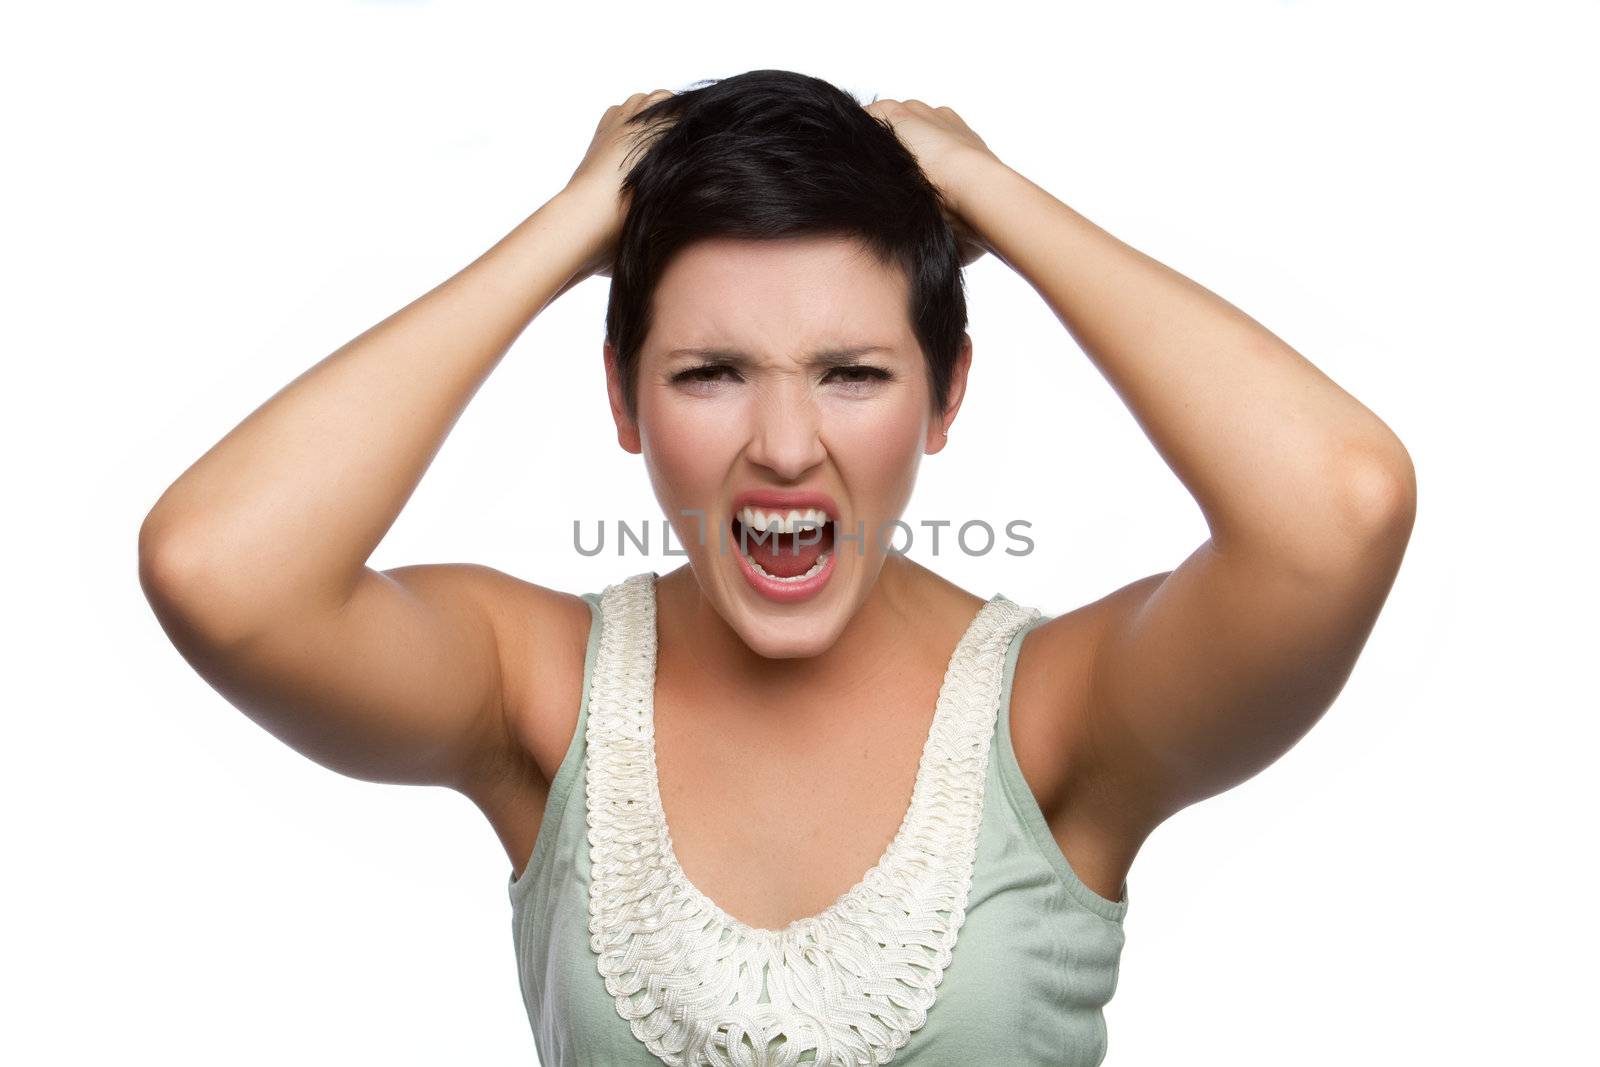 Angry Screaming Woman by keeweeboy